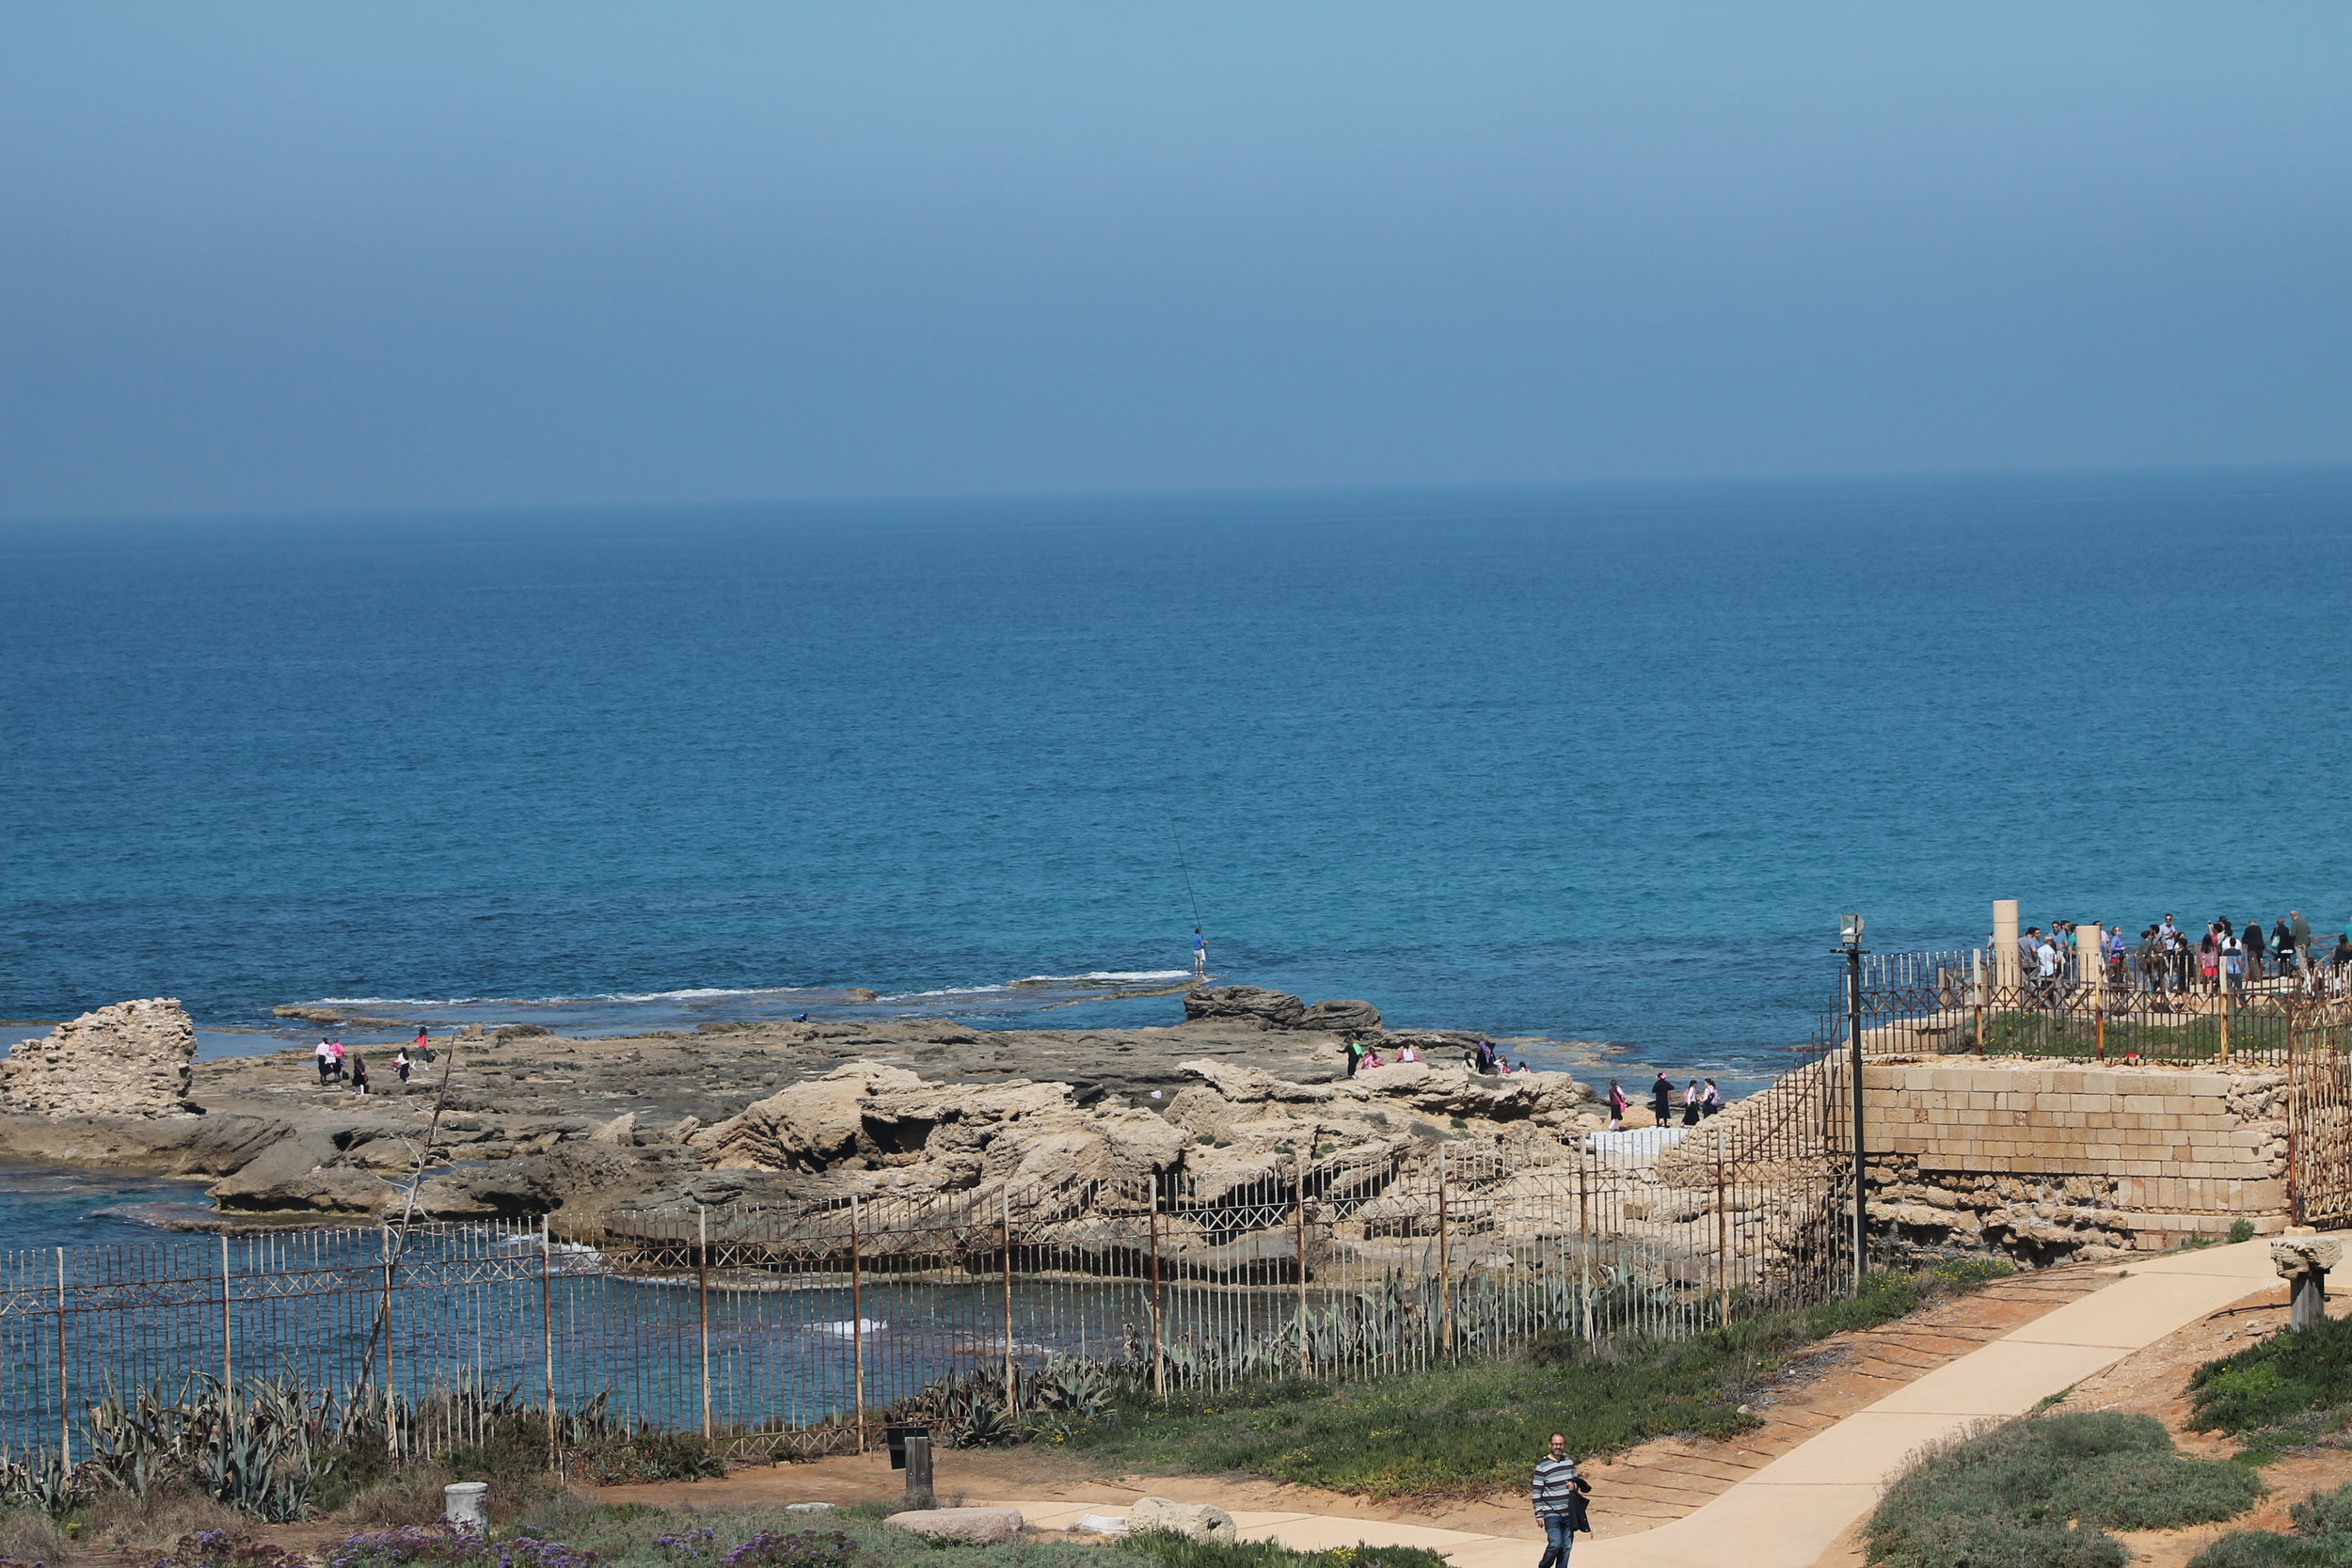 Caesarea Maritima, the ancient port built by Herod the Great as a grand place to enter the land.